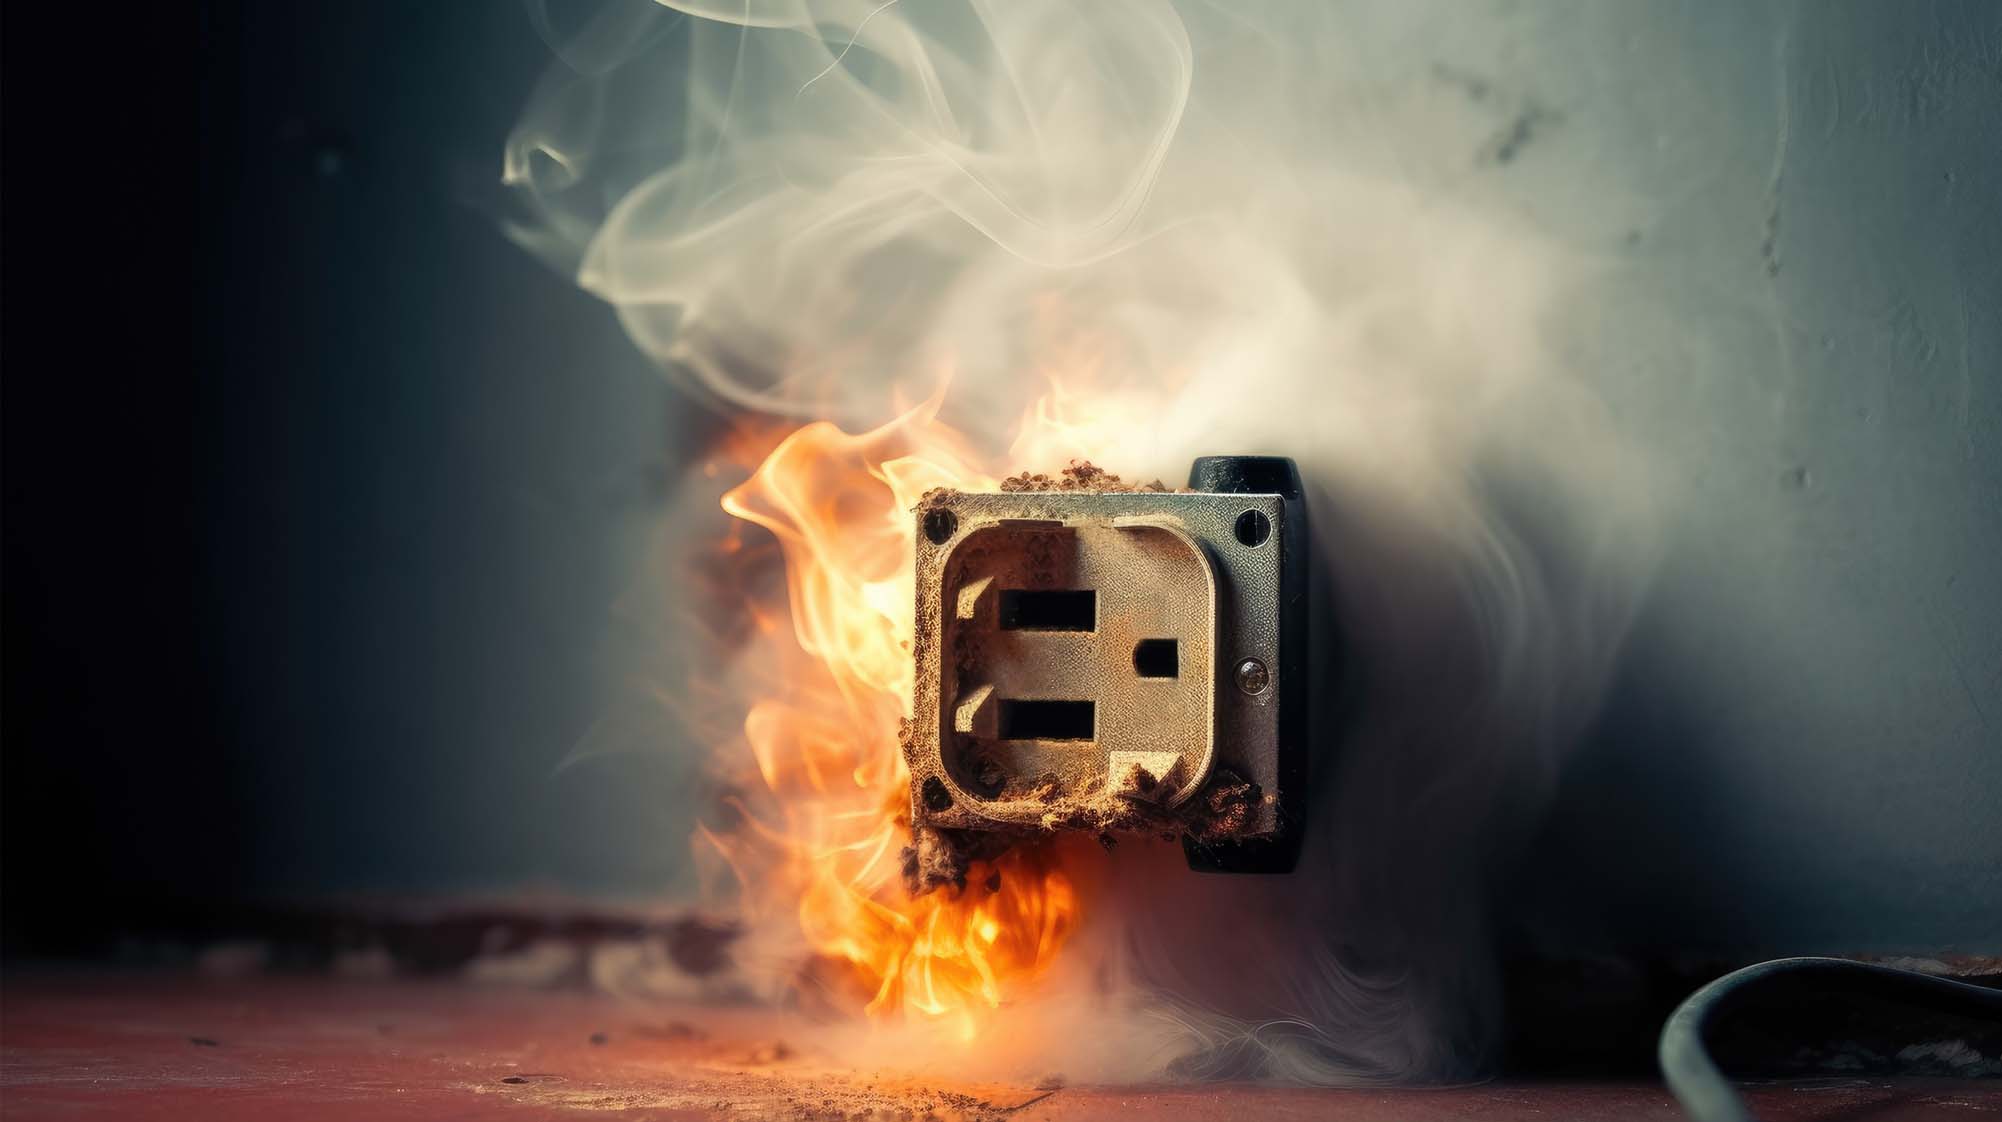 Defective Wall Outlet on Fire - vehicle accident lawyer in Sugar Land Texas